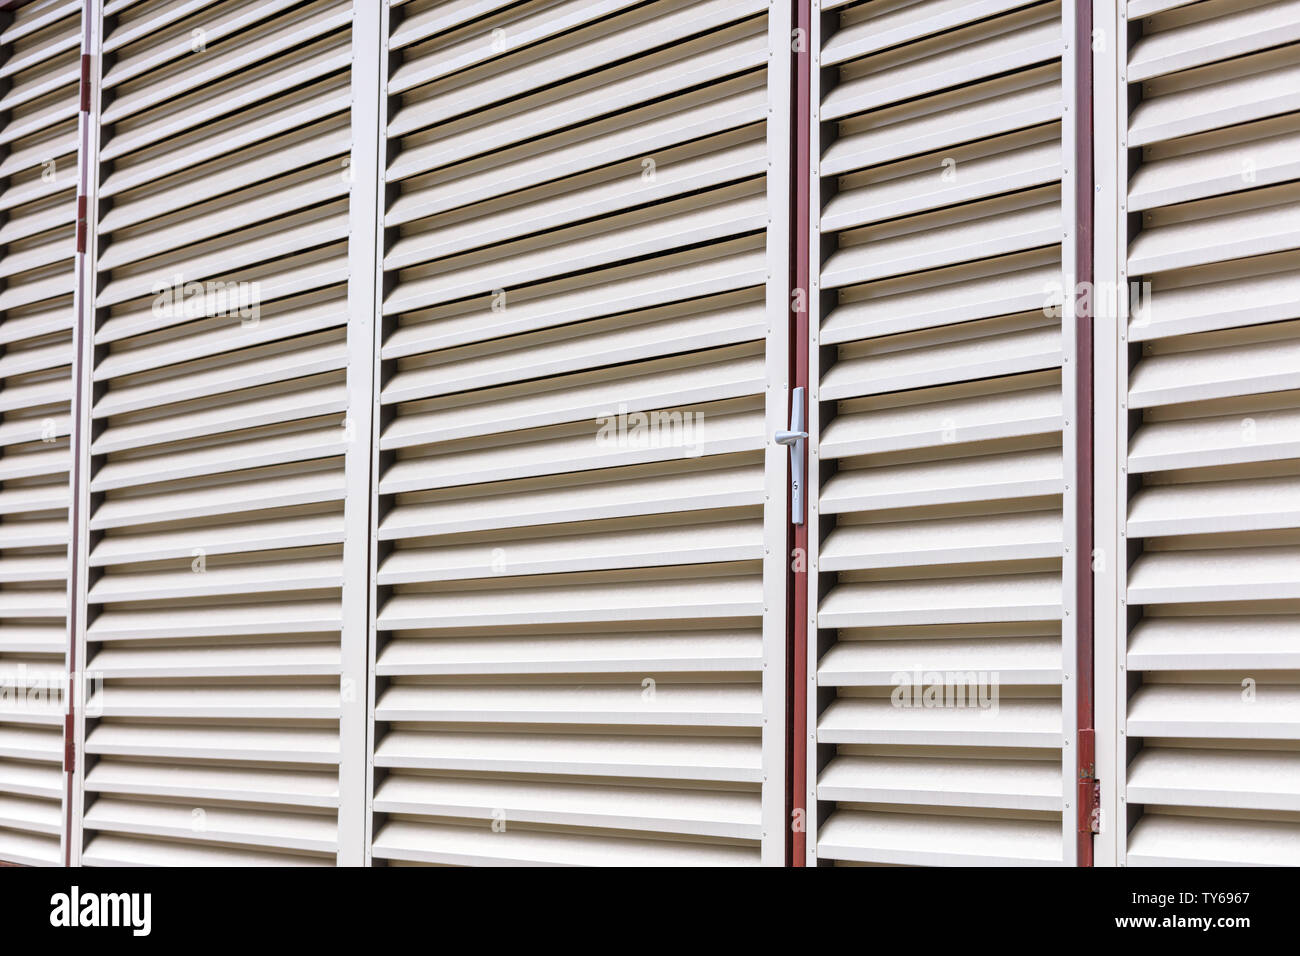 exterior view of warehouse building. vent wall pattern. abstract striped background of metal louvers Stock Photo